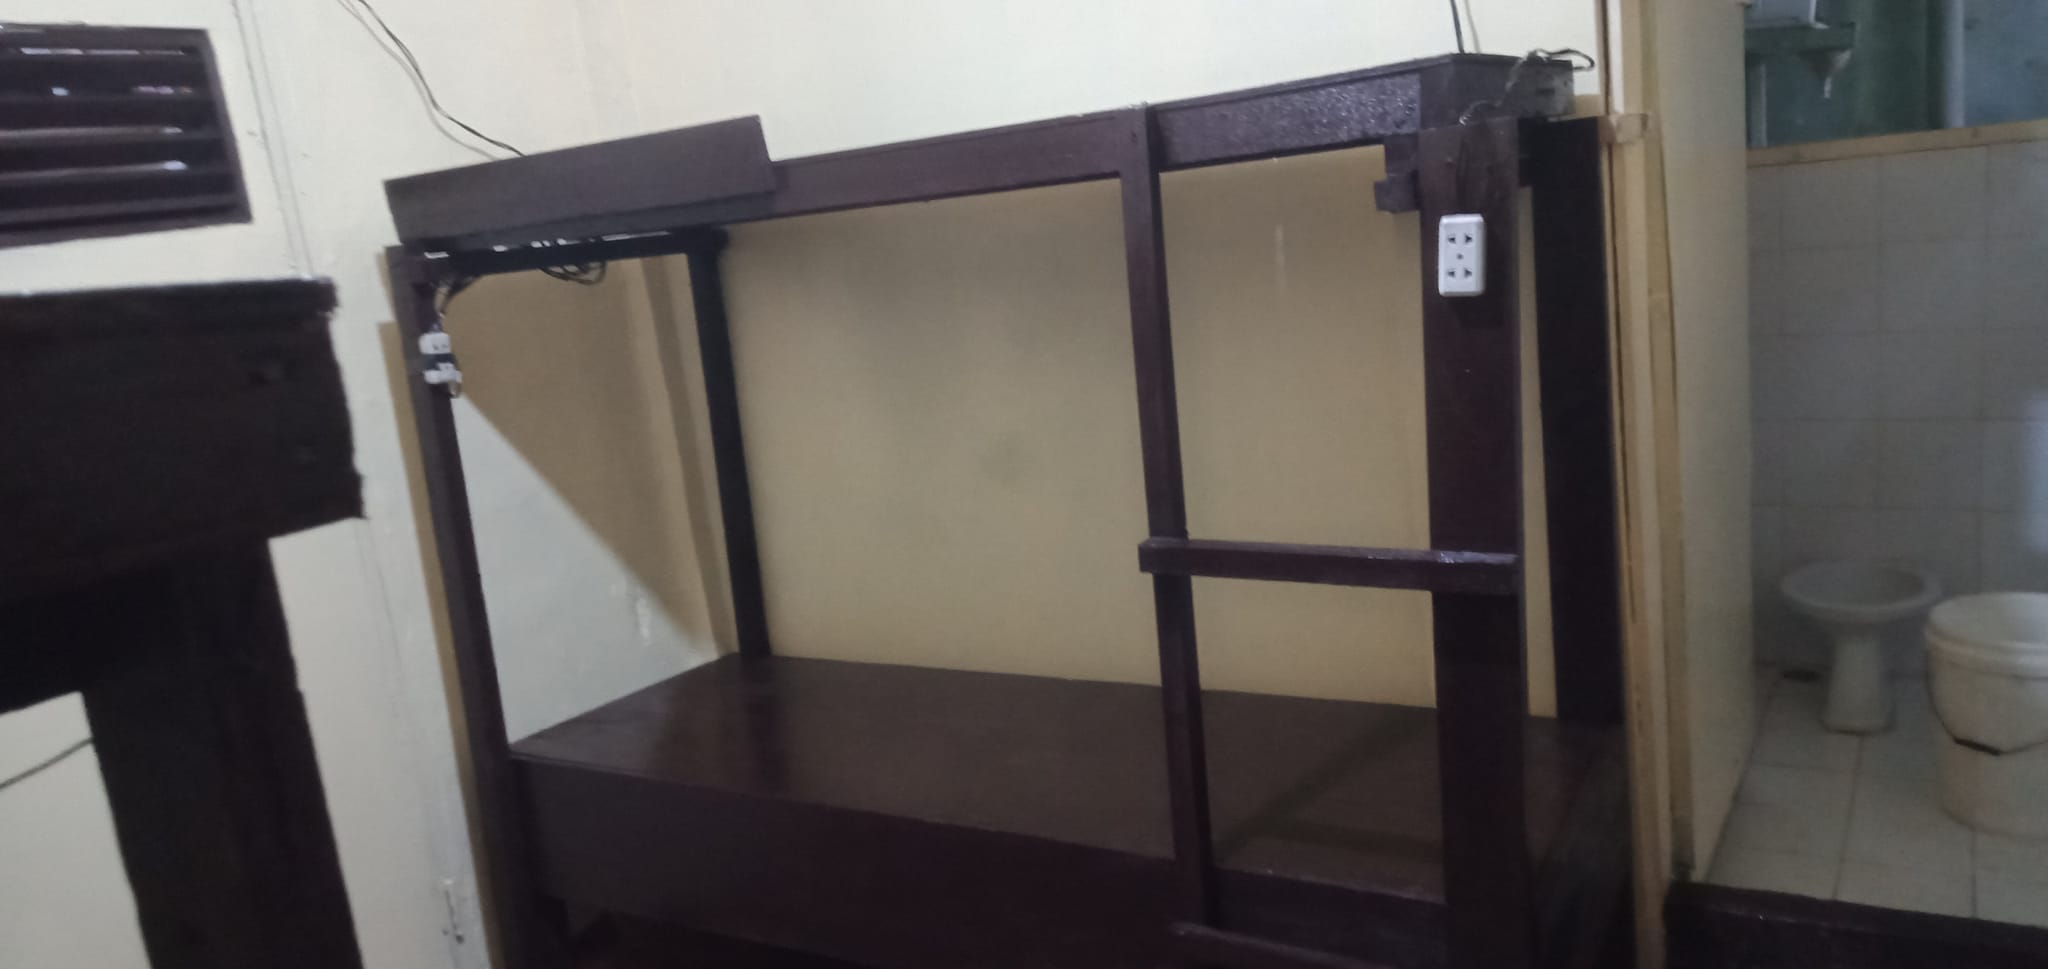 Private: Private: MALE BEDSPACE available in Brgy Poblacion Makati City